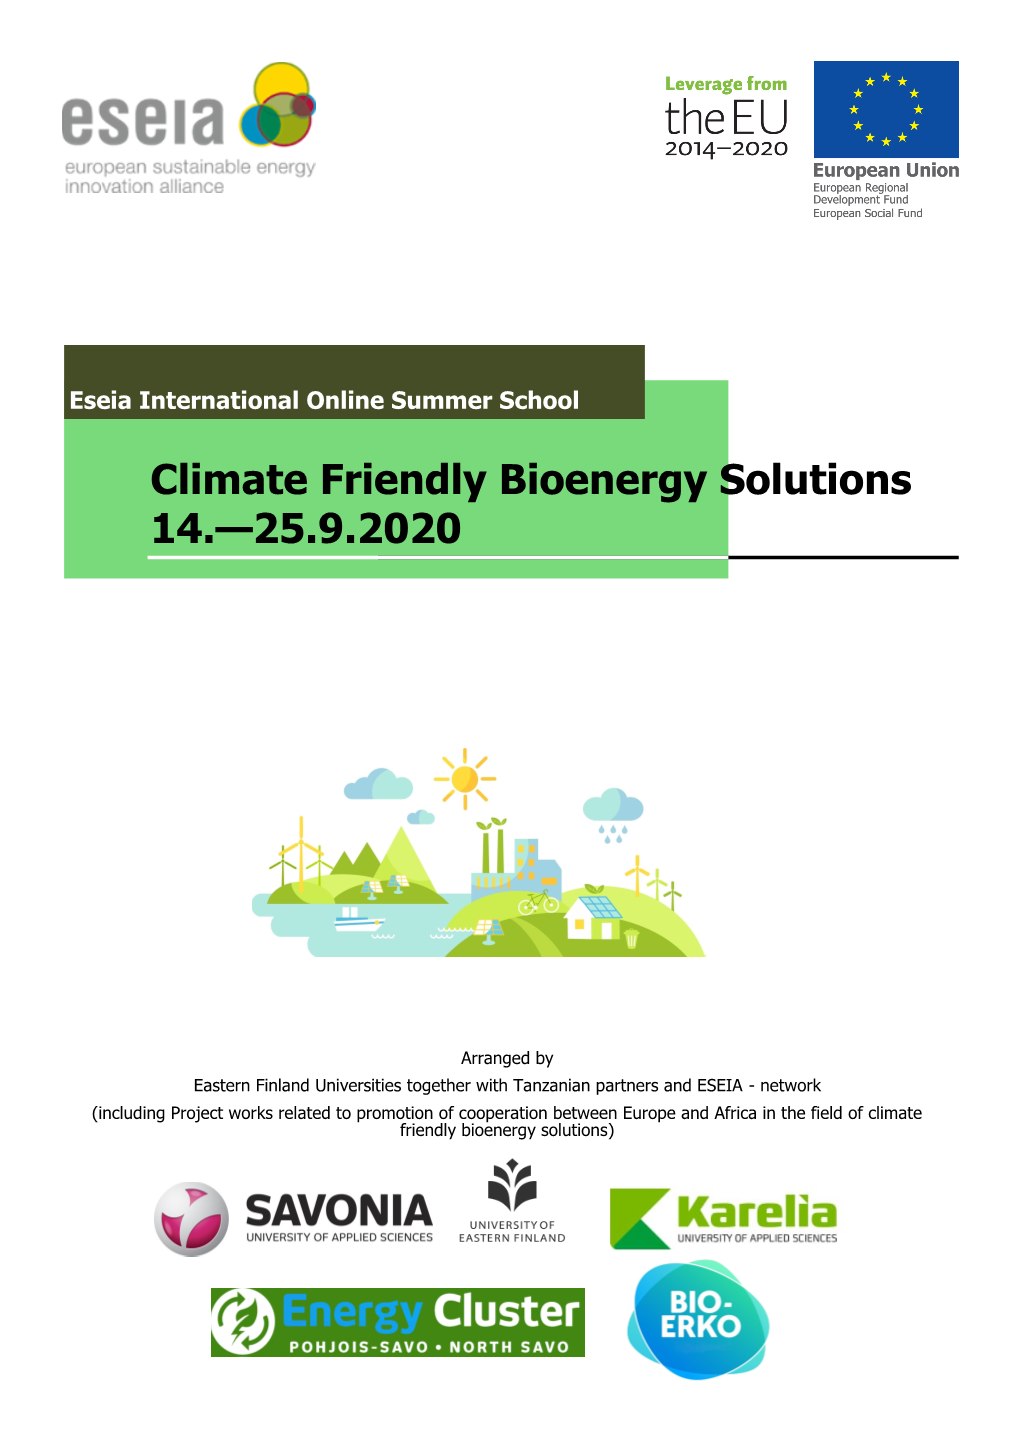 Climate Friendly Bioenergy Solutions 14.—25.9.2020